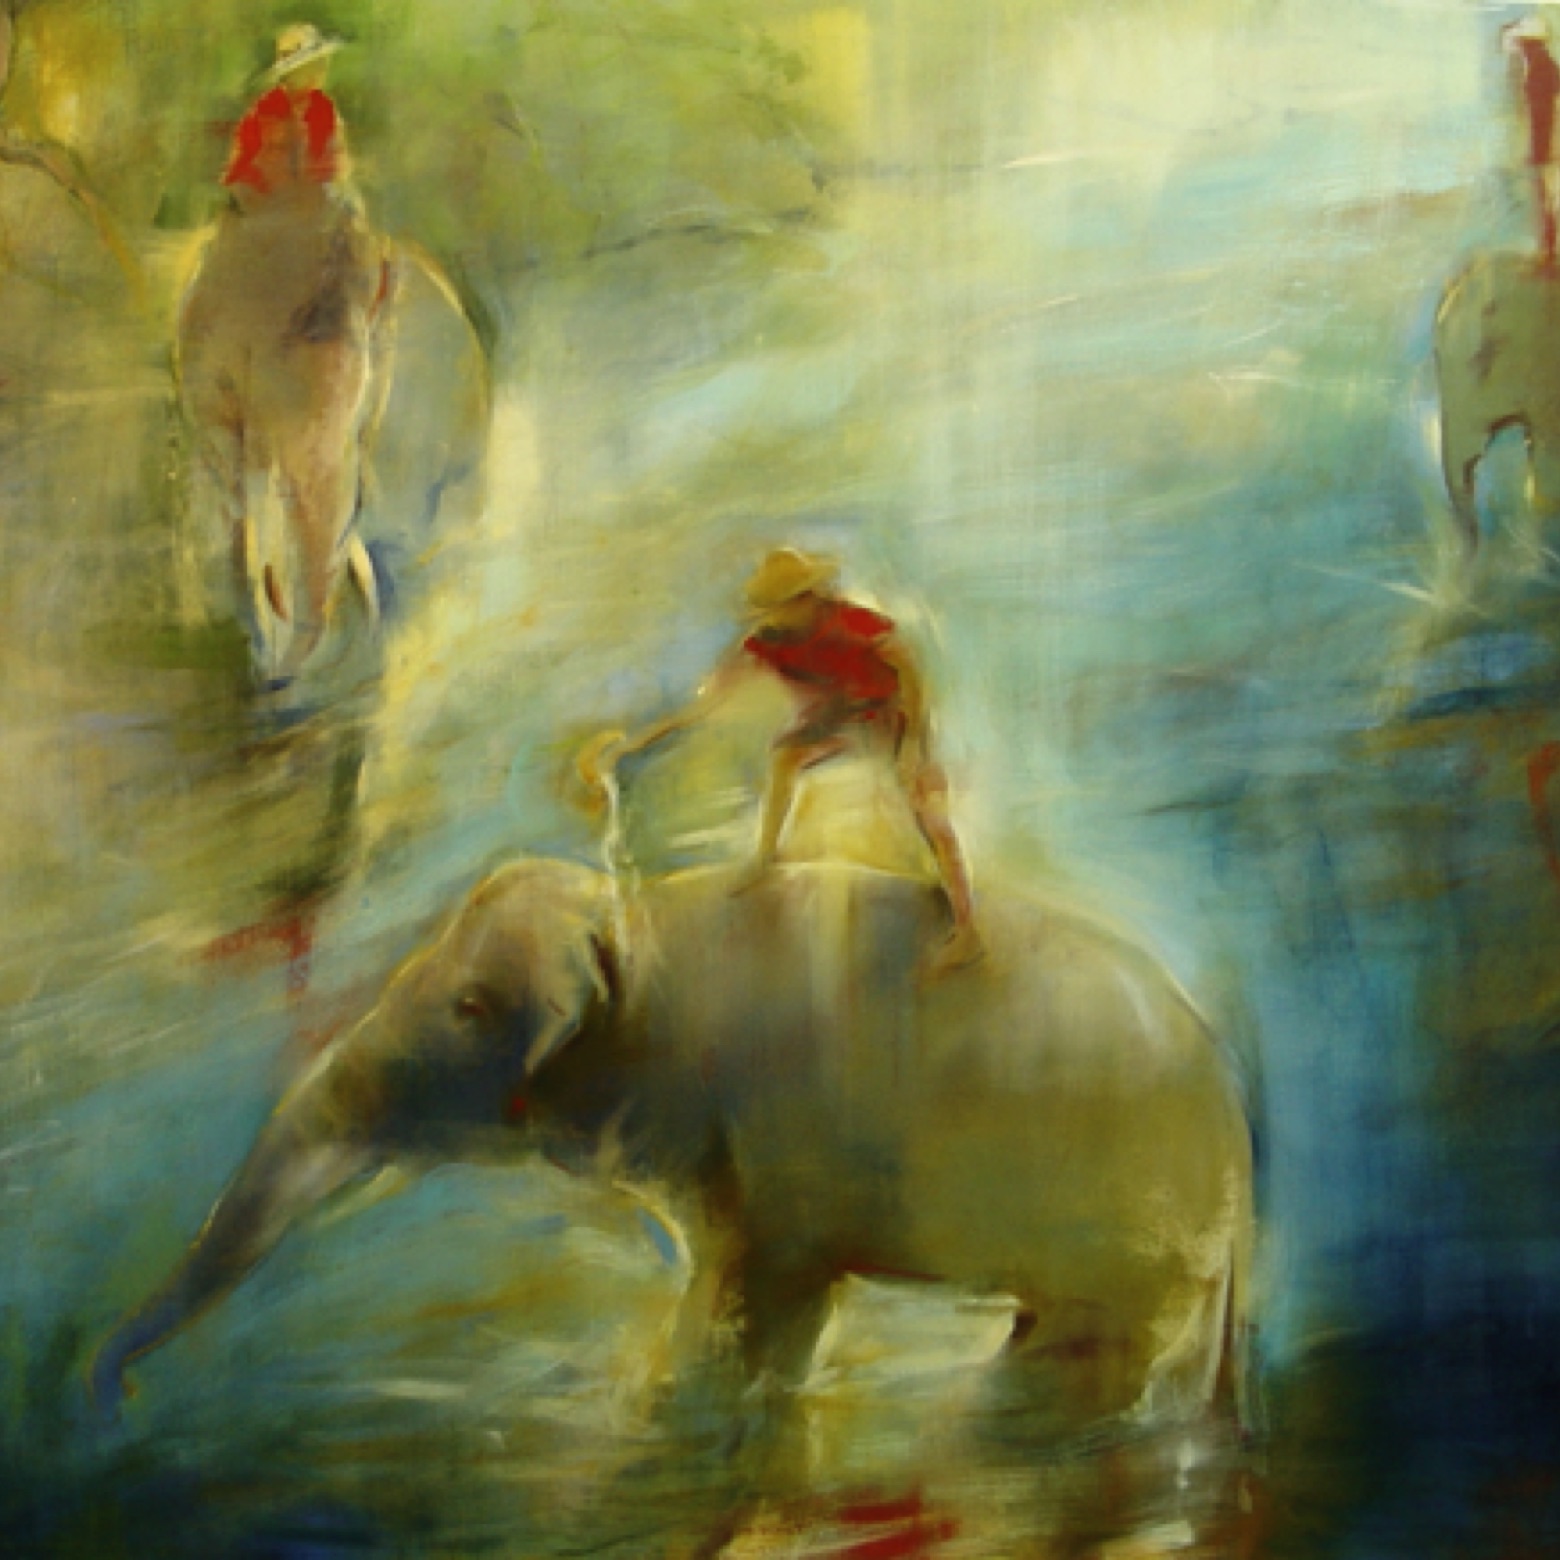 Gregg Chadwick
A Walk With Ganesh
72"x84" oil on linen 2005 
Private collection